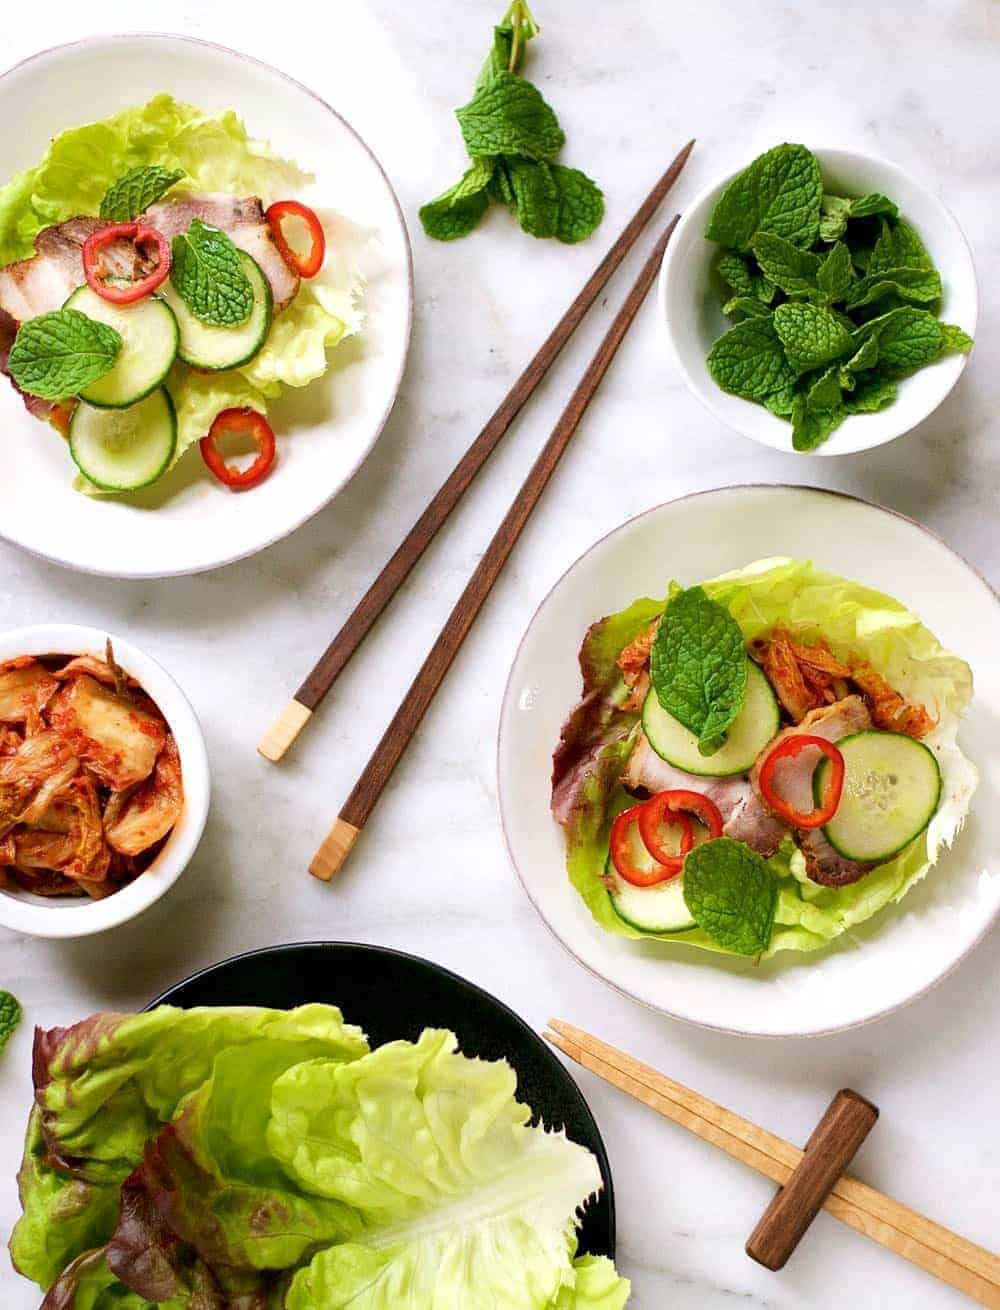 Asian lettuce wraps with pork belly, cucumber, and mint.